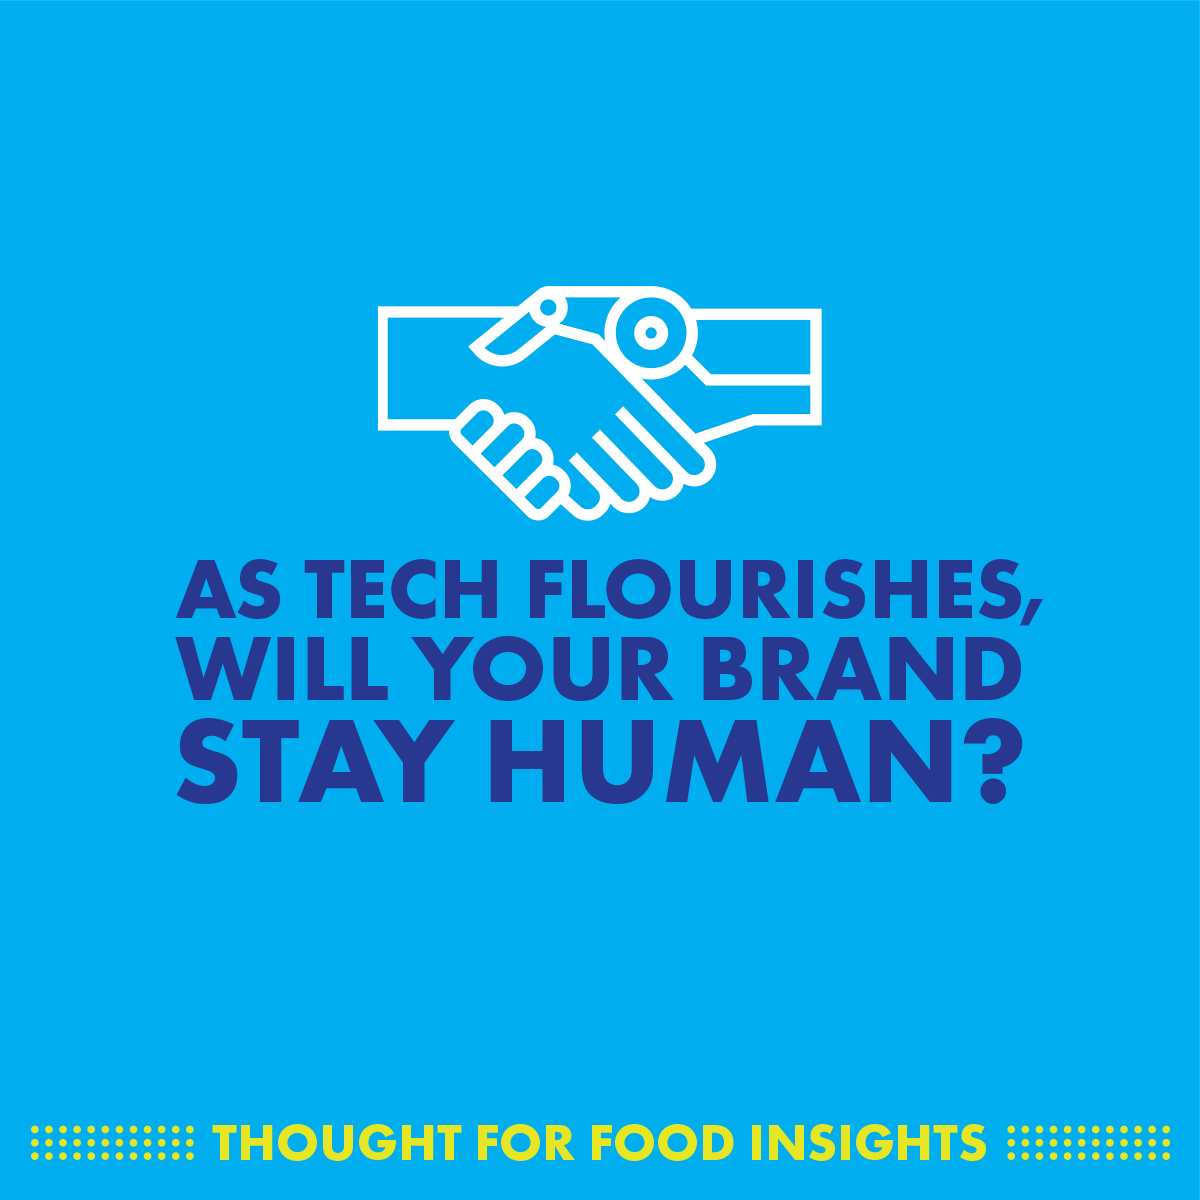 As tech flourishes, will your brand stay human?